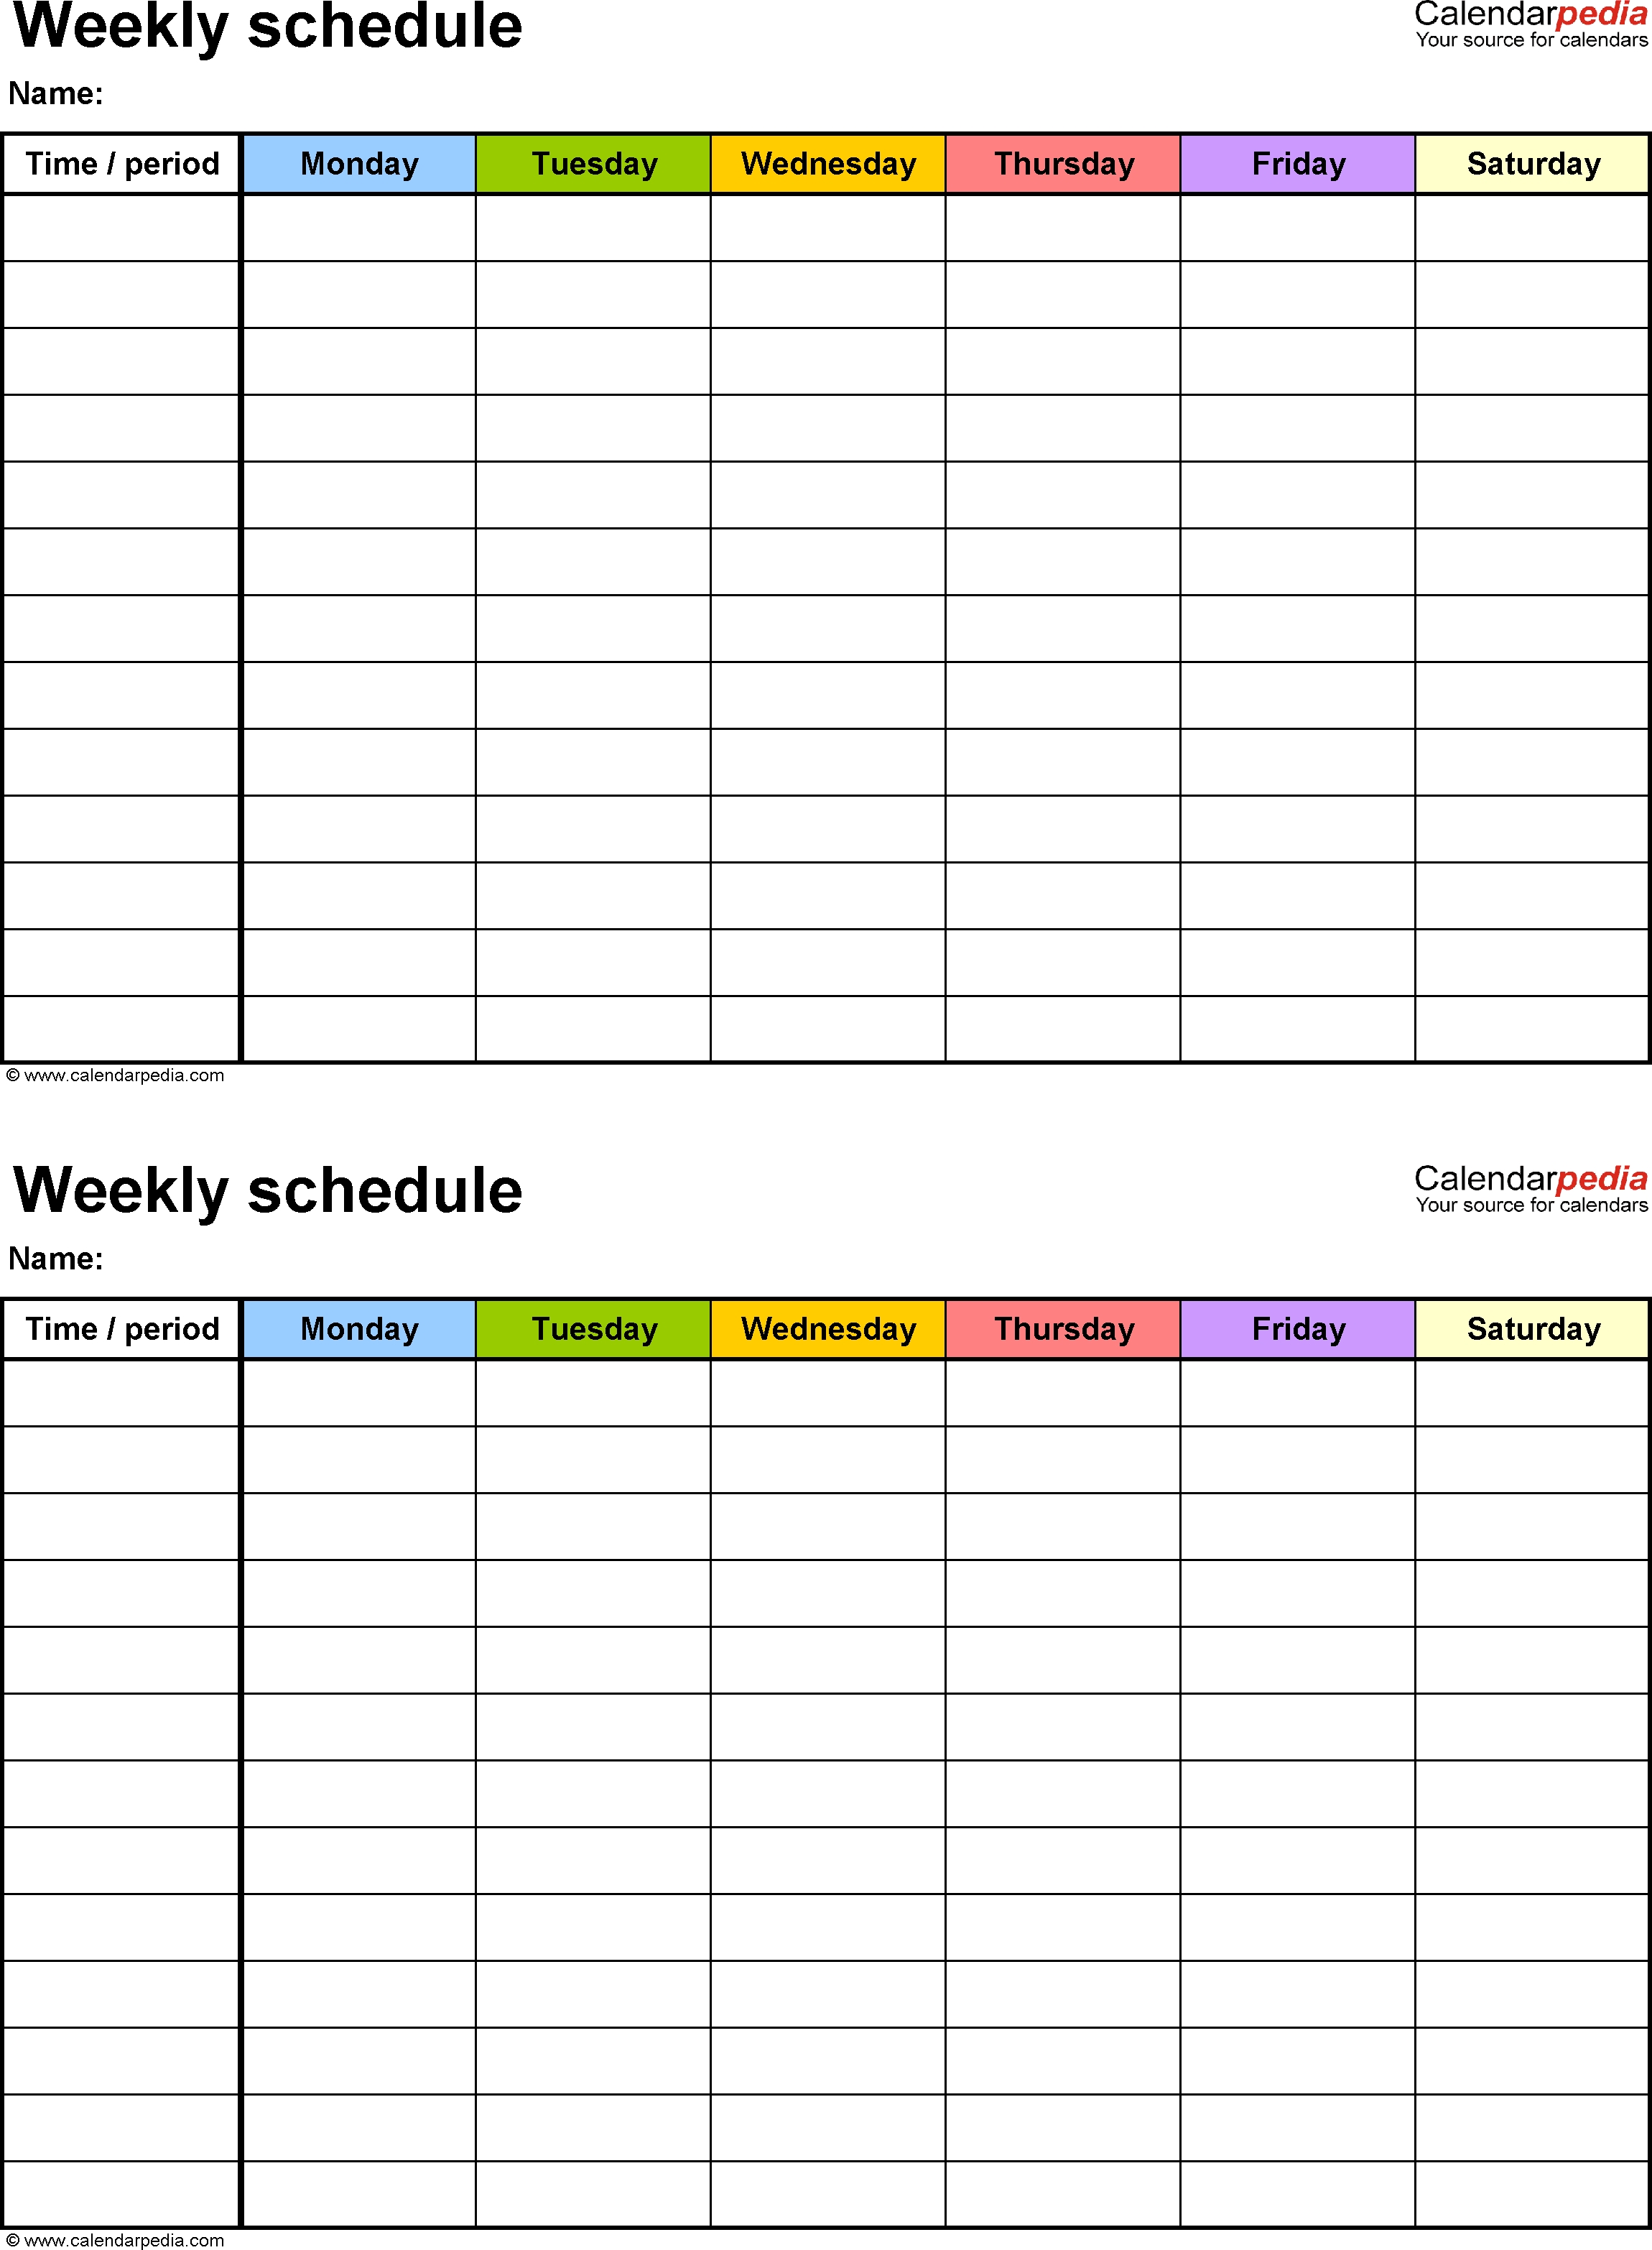 Free Weekly Schedule Templates For Pdf - 18 Templates throughout Extra Large Printable Blank Weekly Employee Schedule